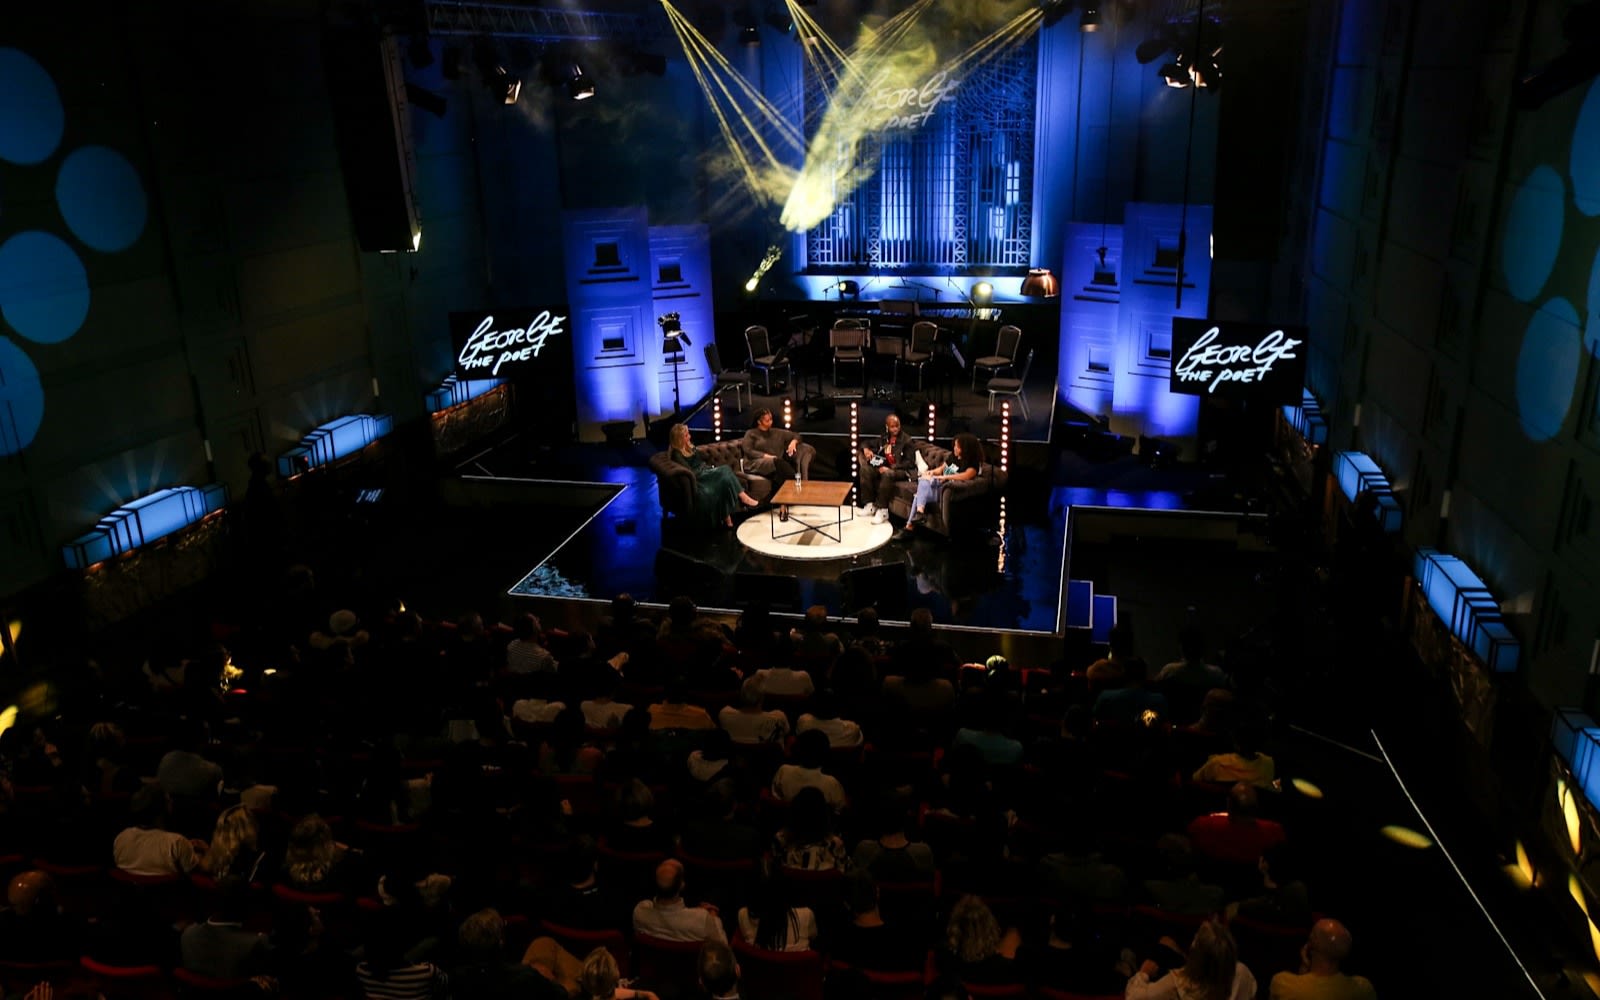 Holly Branson joining a panel on education with George The Poet as part of his BBC Sounds live show in London 2019